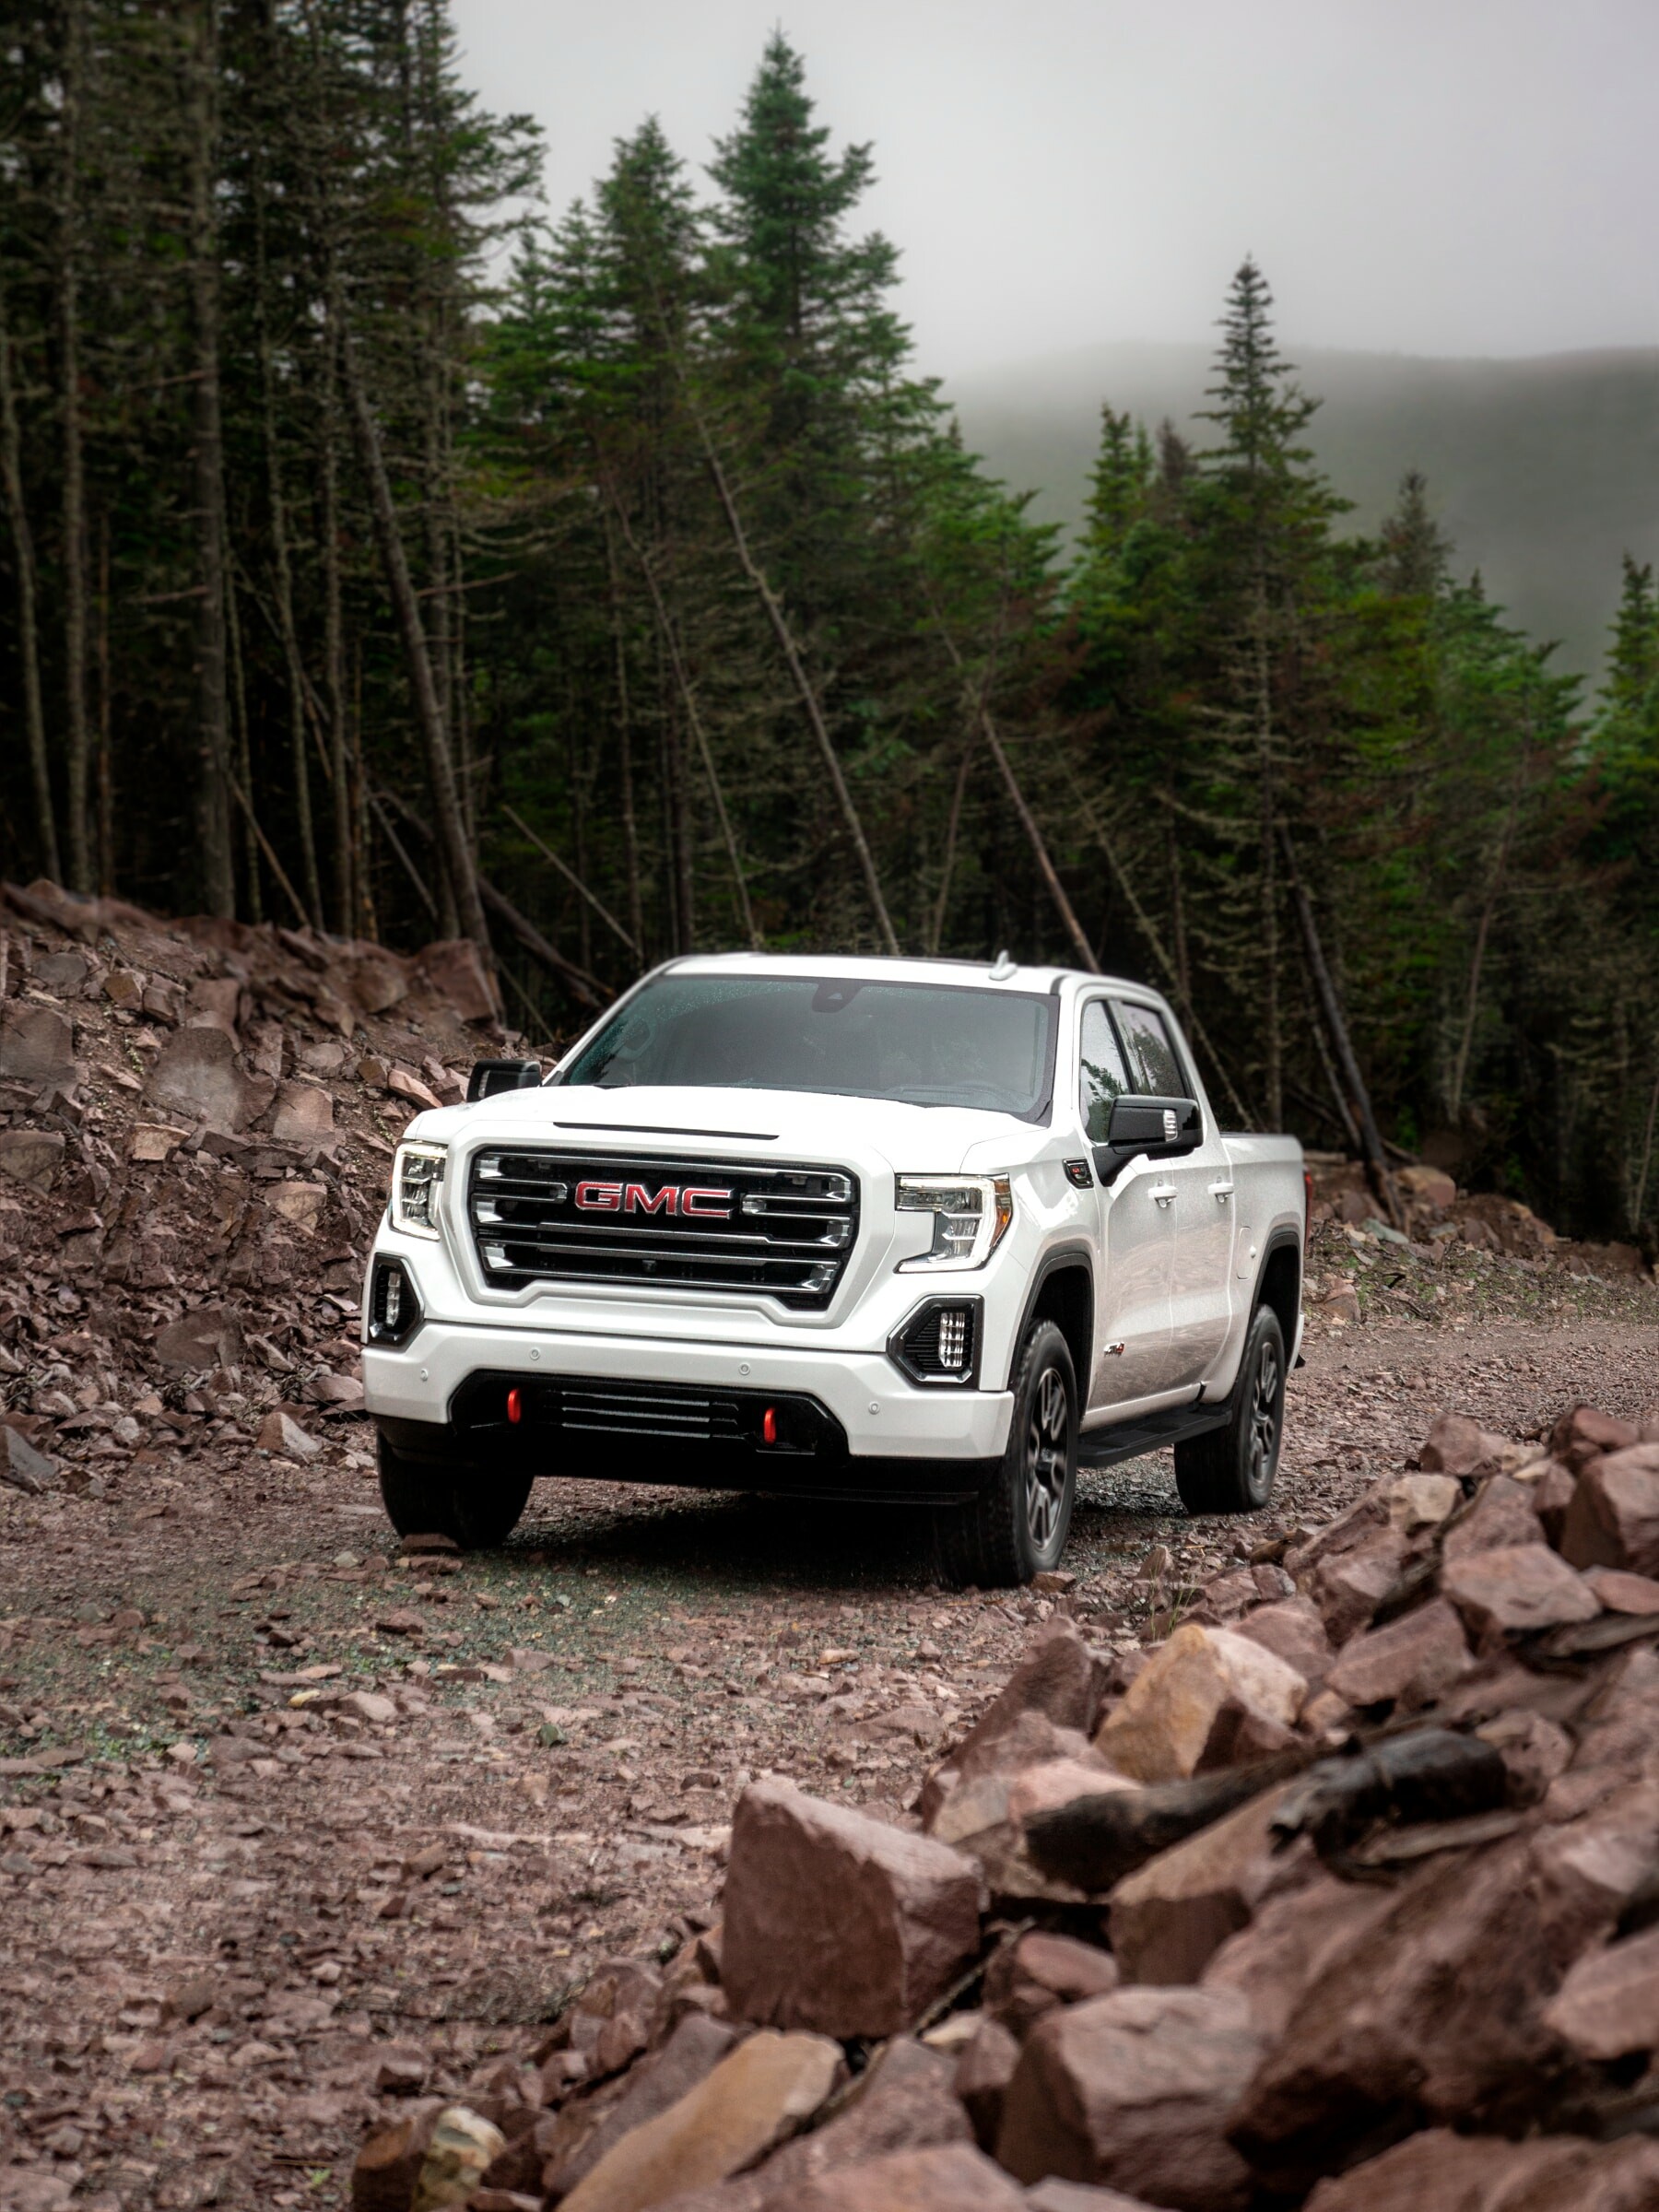 GMC Sierra: Heavy-duty full-size pickup truck, Premium powertrains, Refined interior and safety features, Five body styles. 1800x2400 HD Wallpaper.